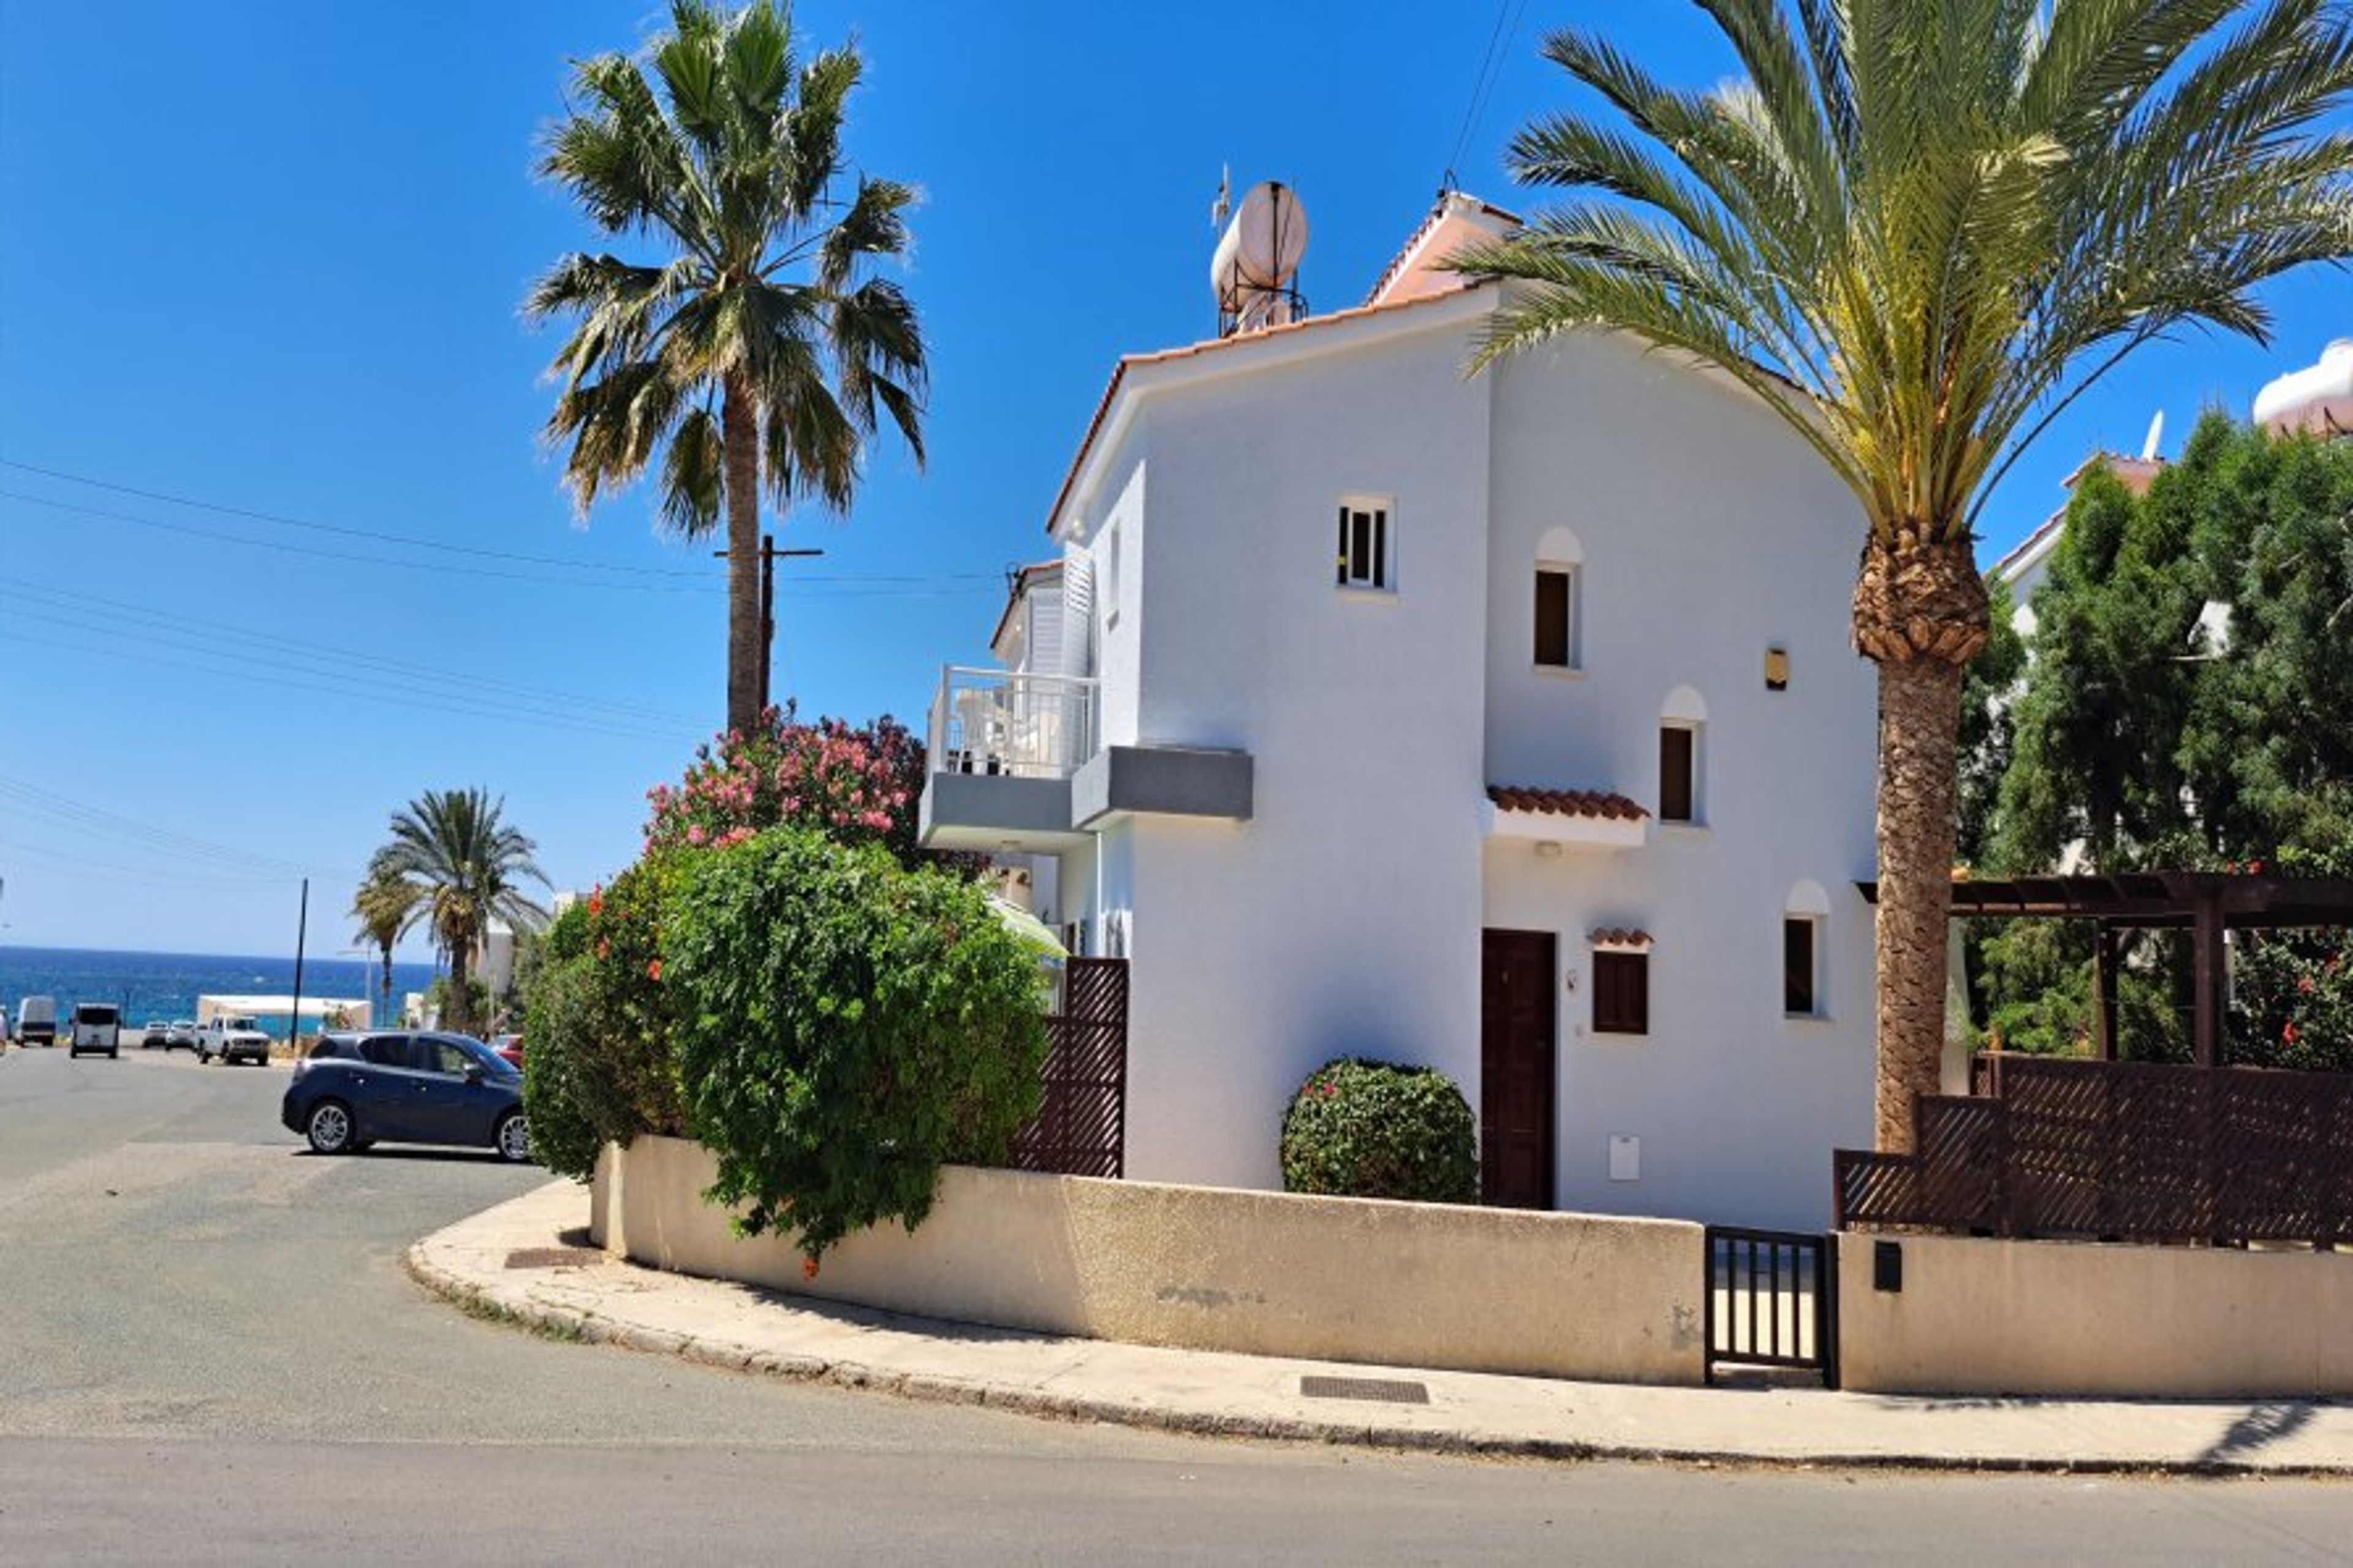 Villa Sirena . I minute from the beach and coastal path to the harbour